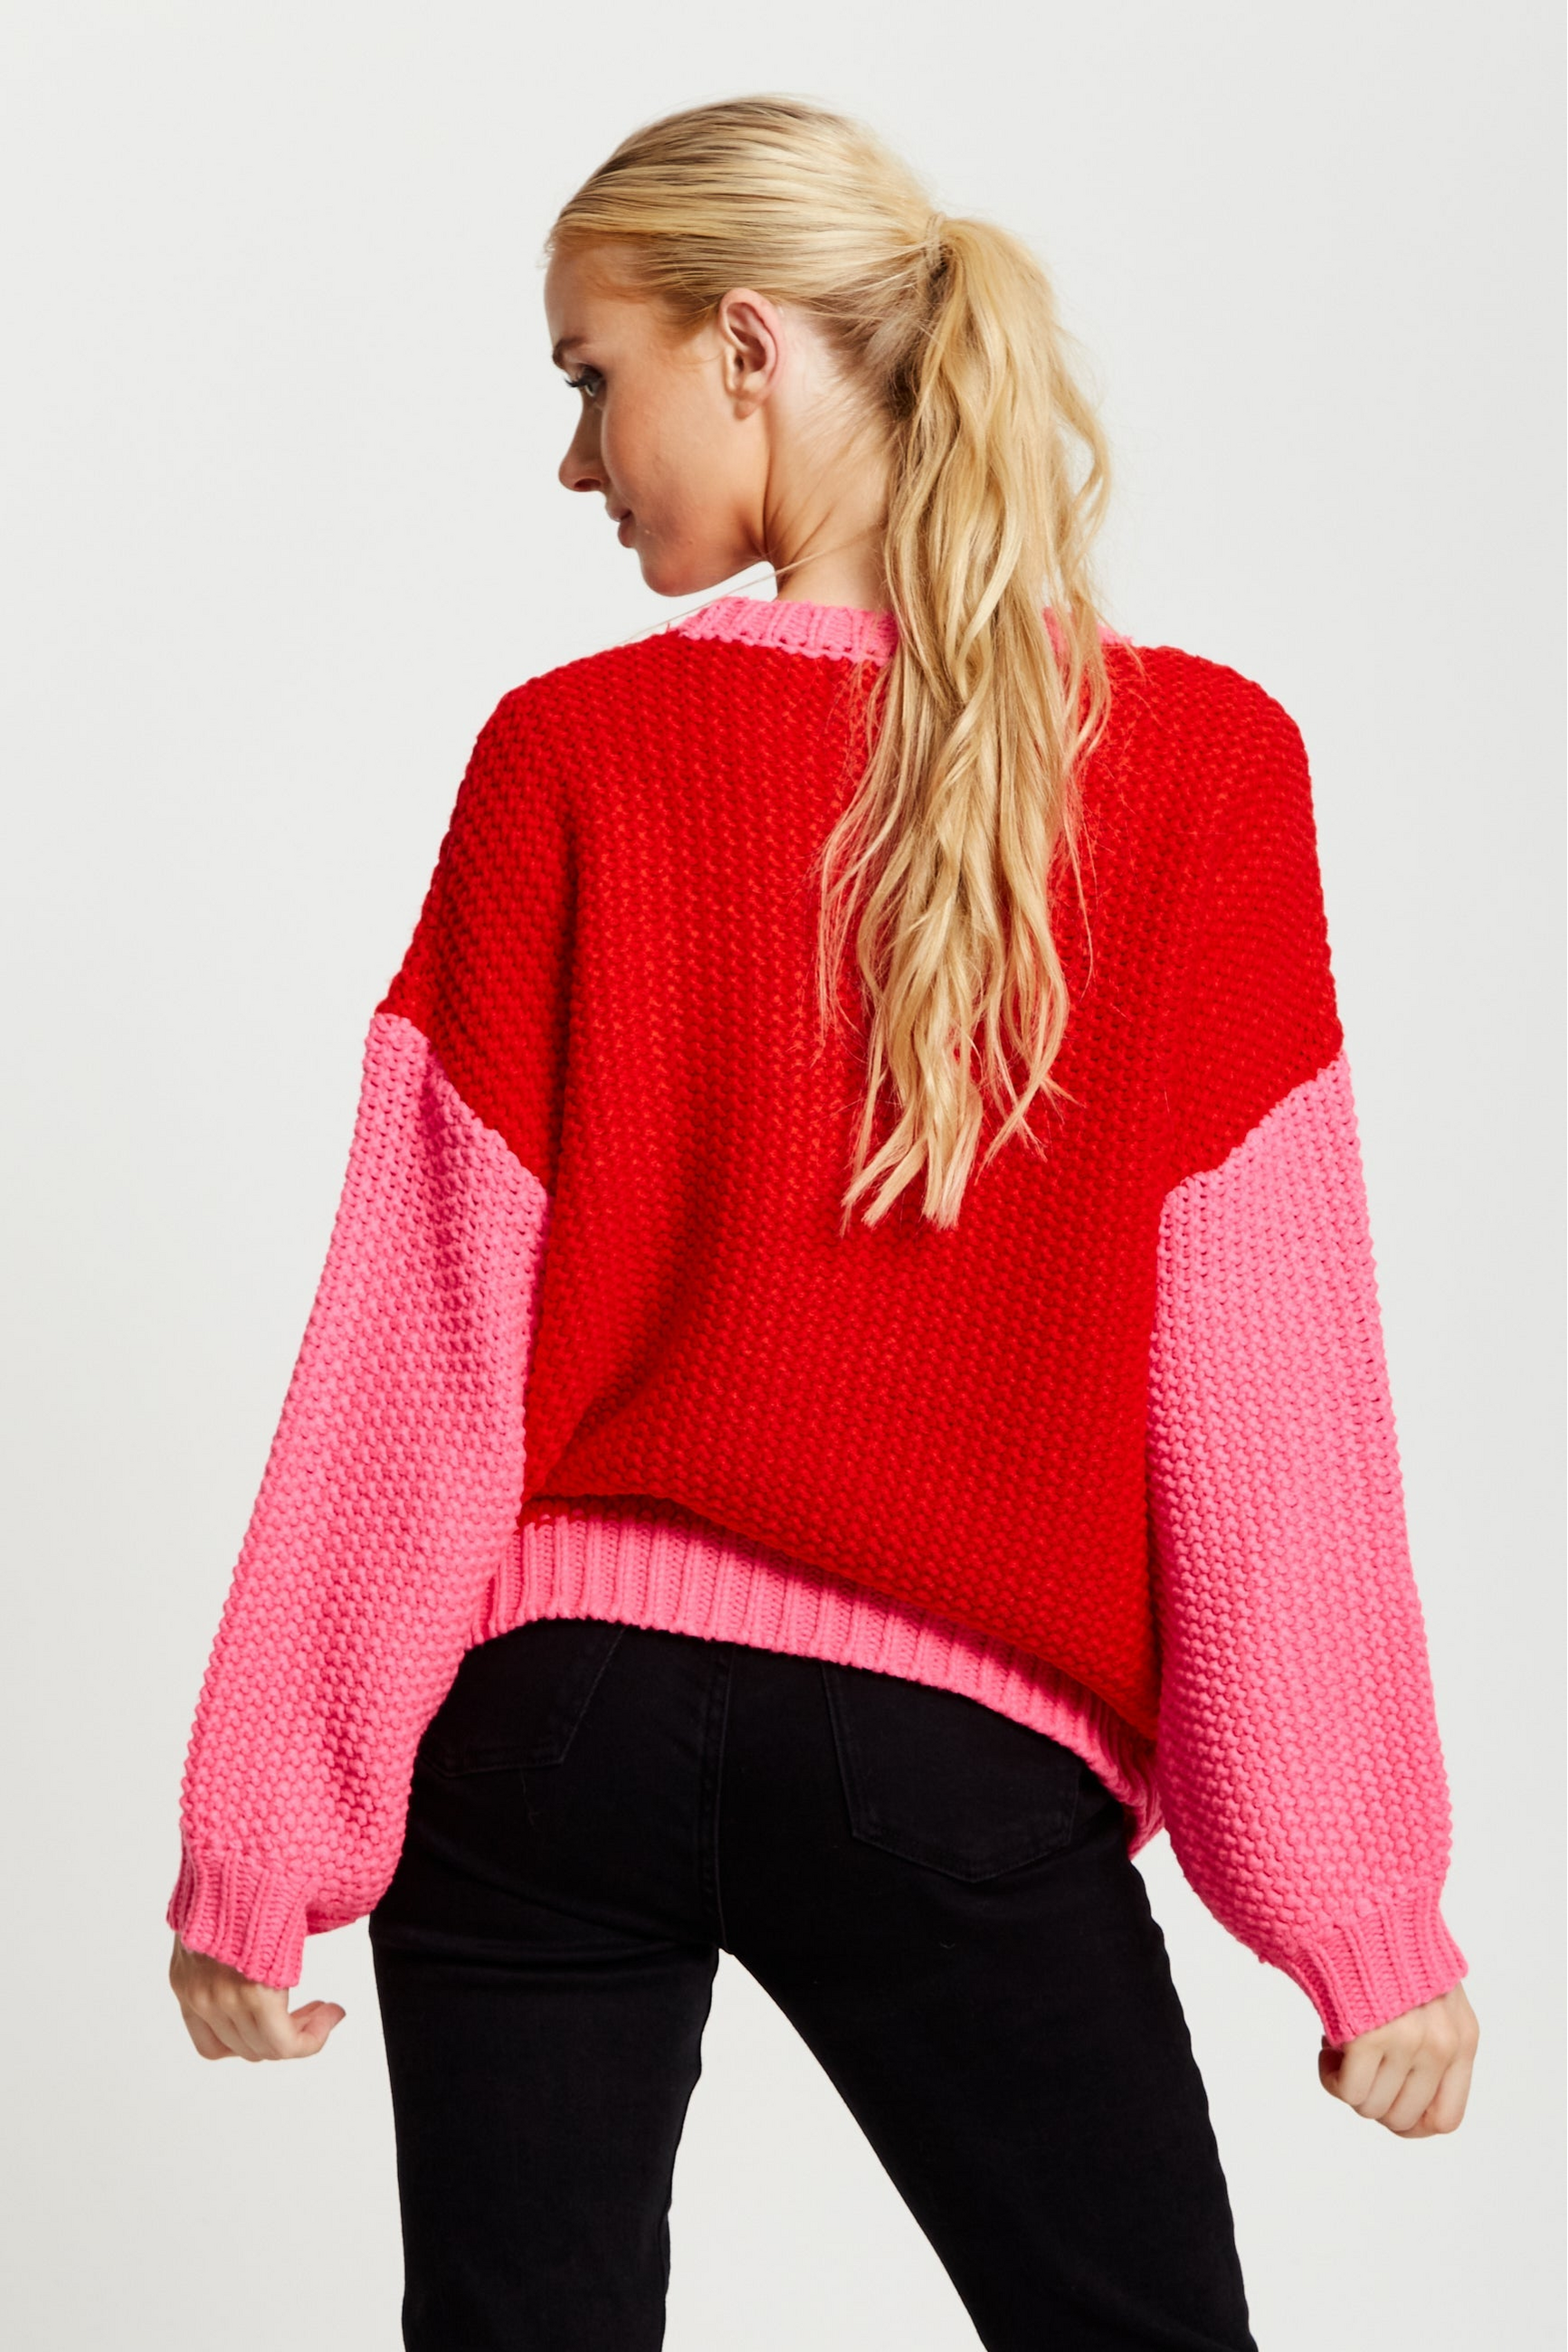 Contrast Sleeve Jumper In Pink And Red A14-LIQ21-191